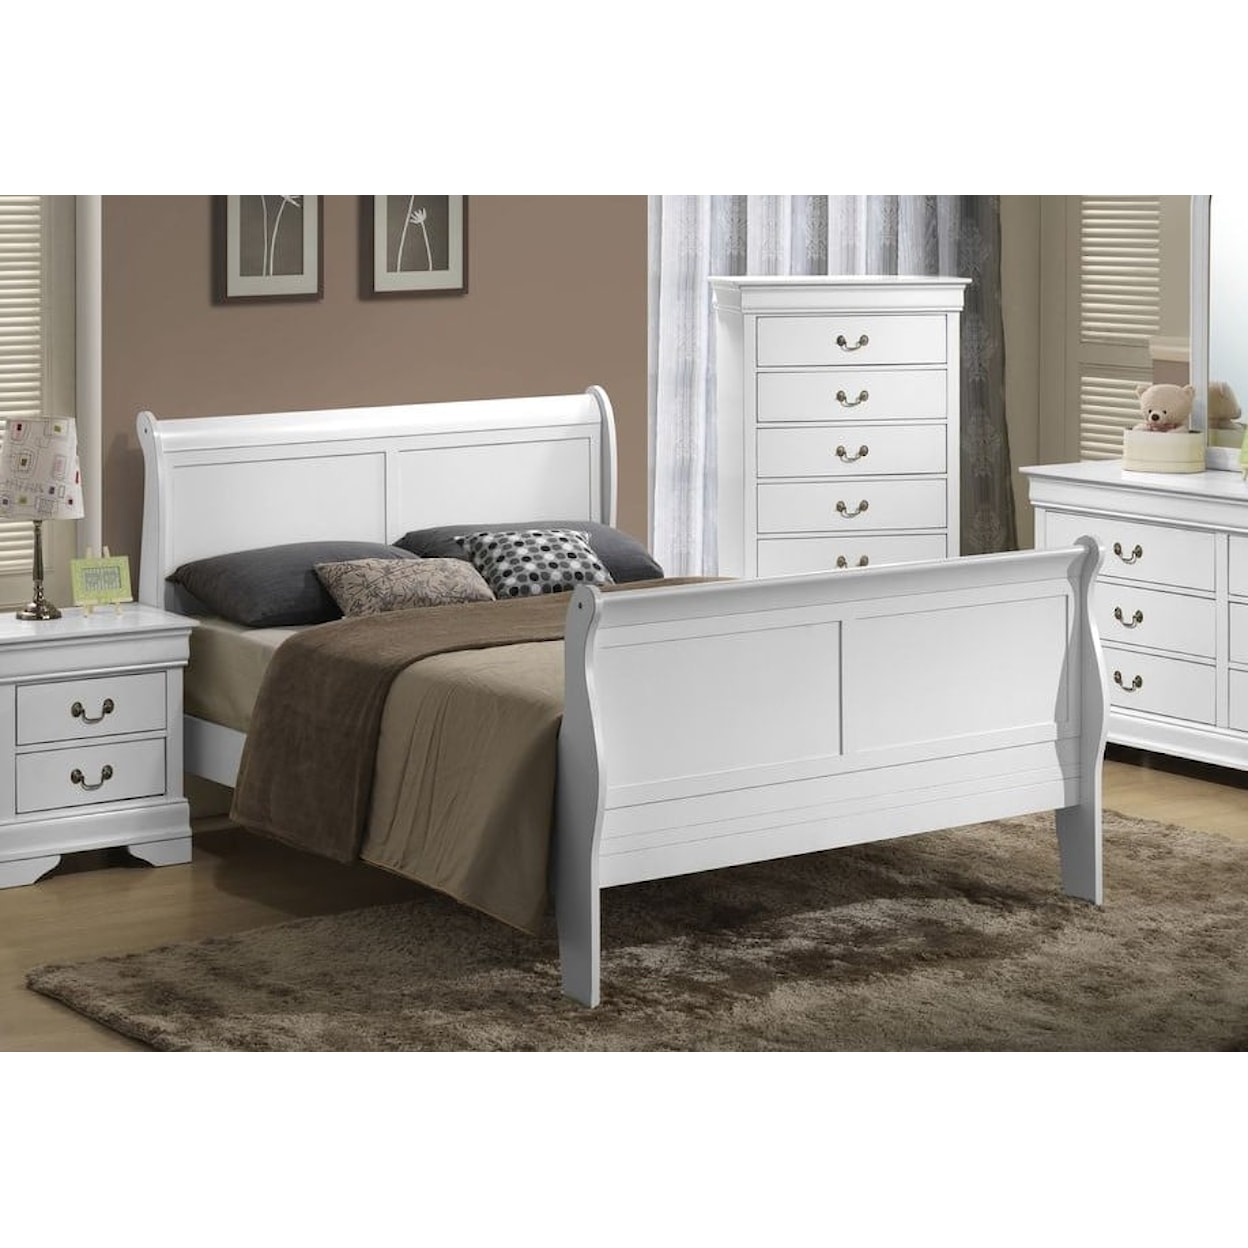 Lifestyle C4936A Queen Sleigh Bed